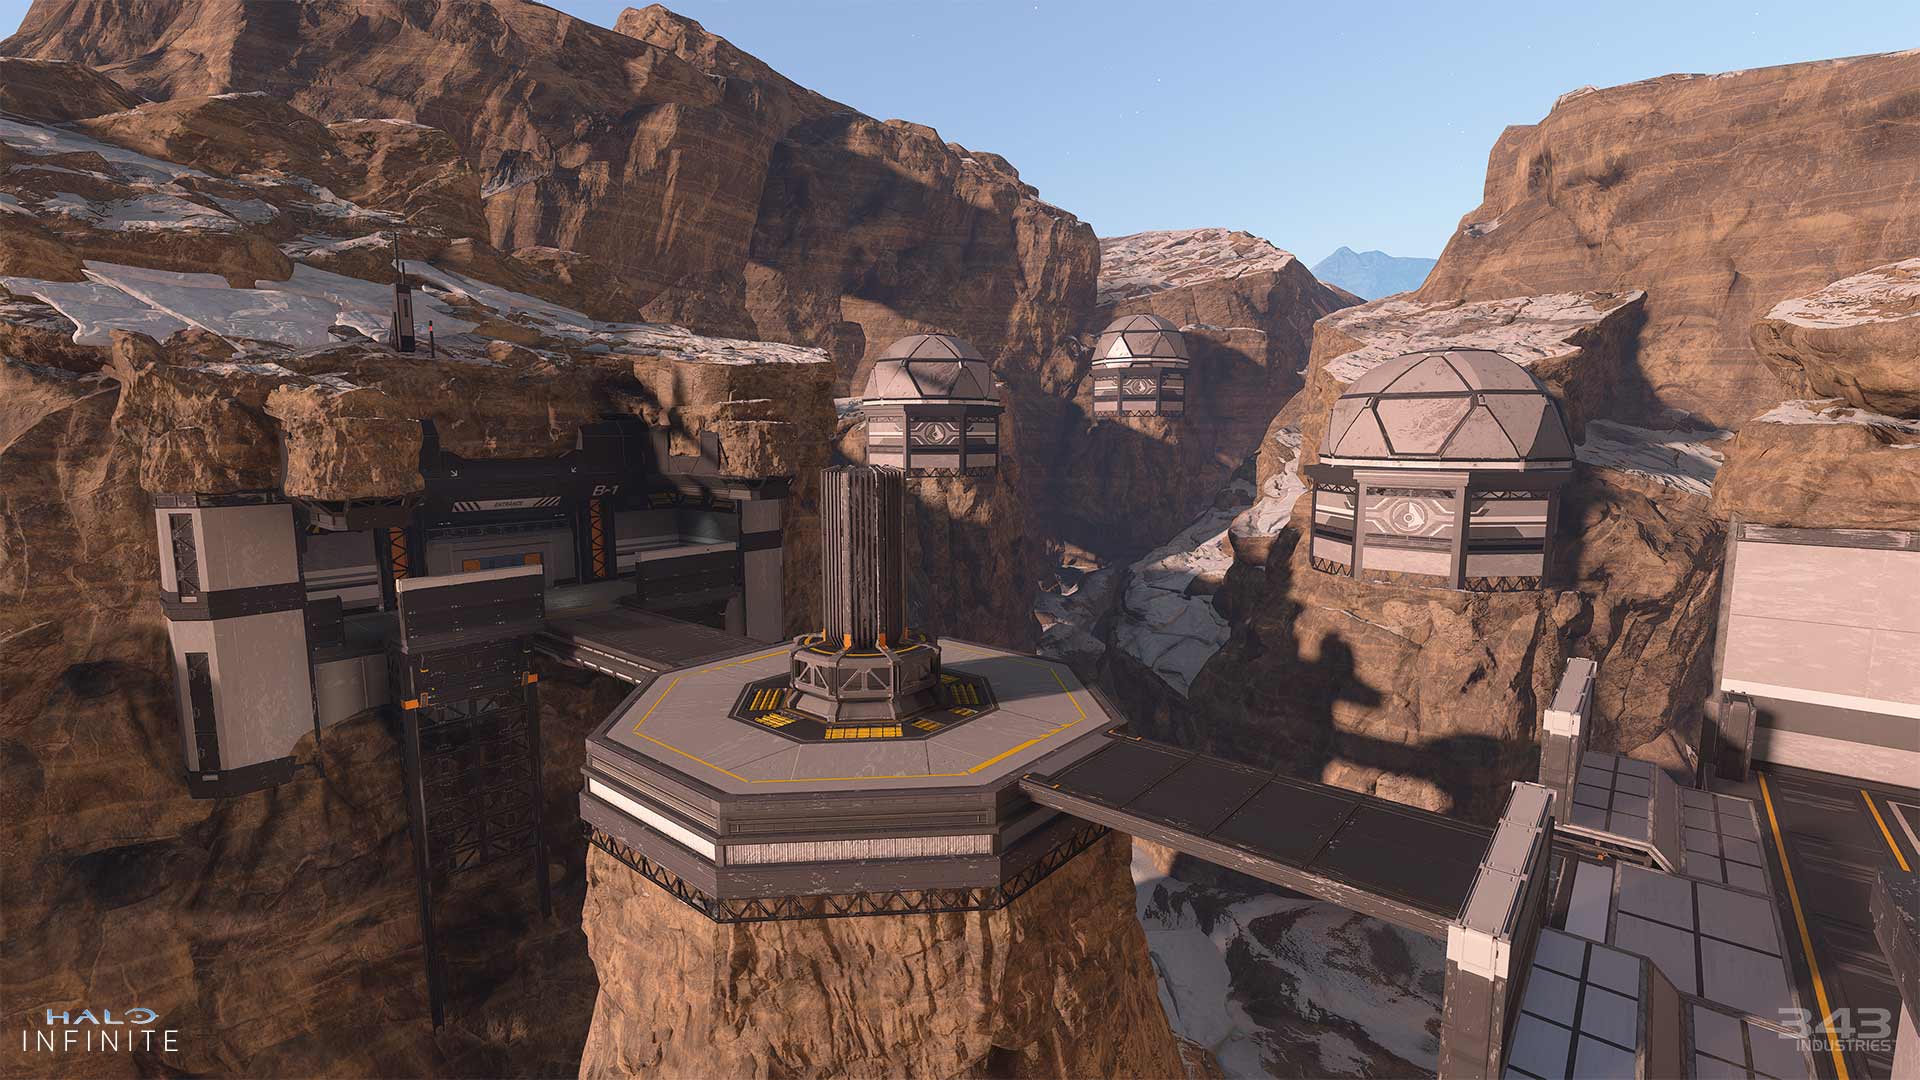 Husky Raid map "Outlook" created in Halo Infinite Forge.